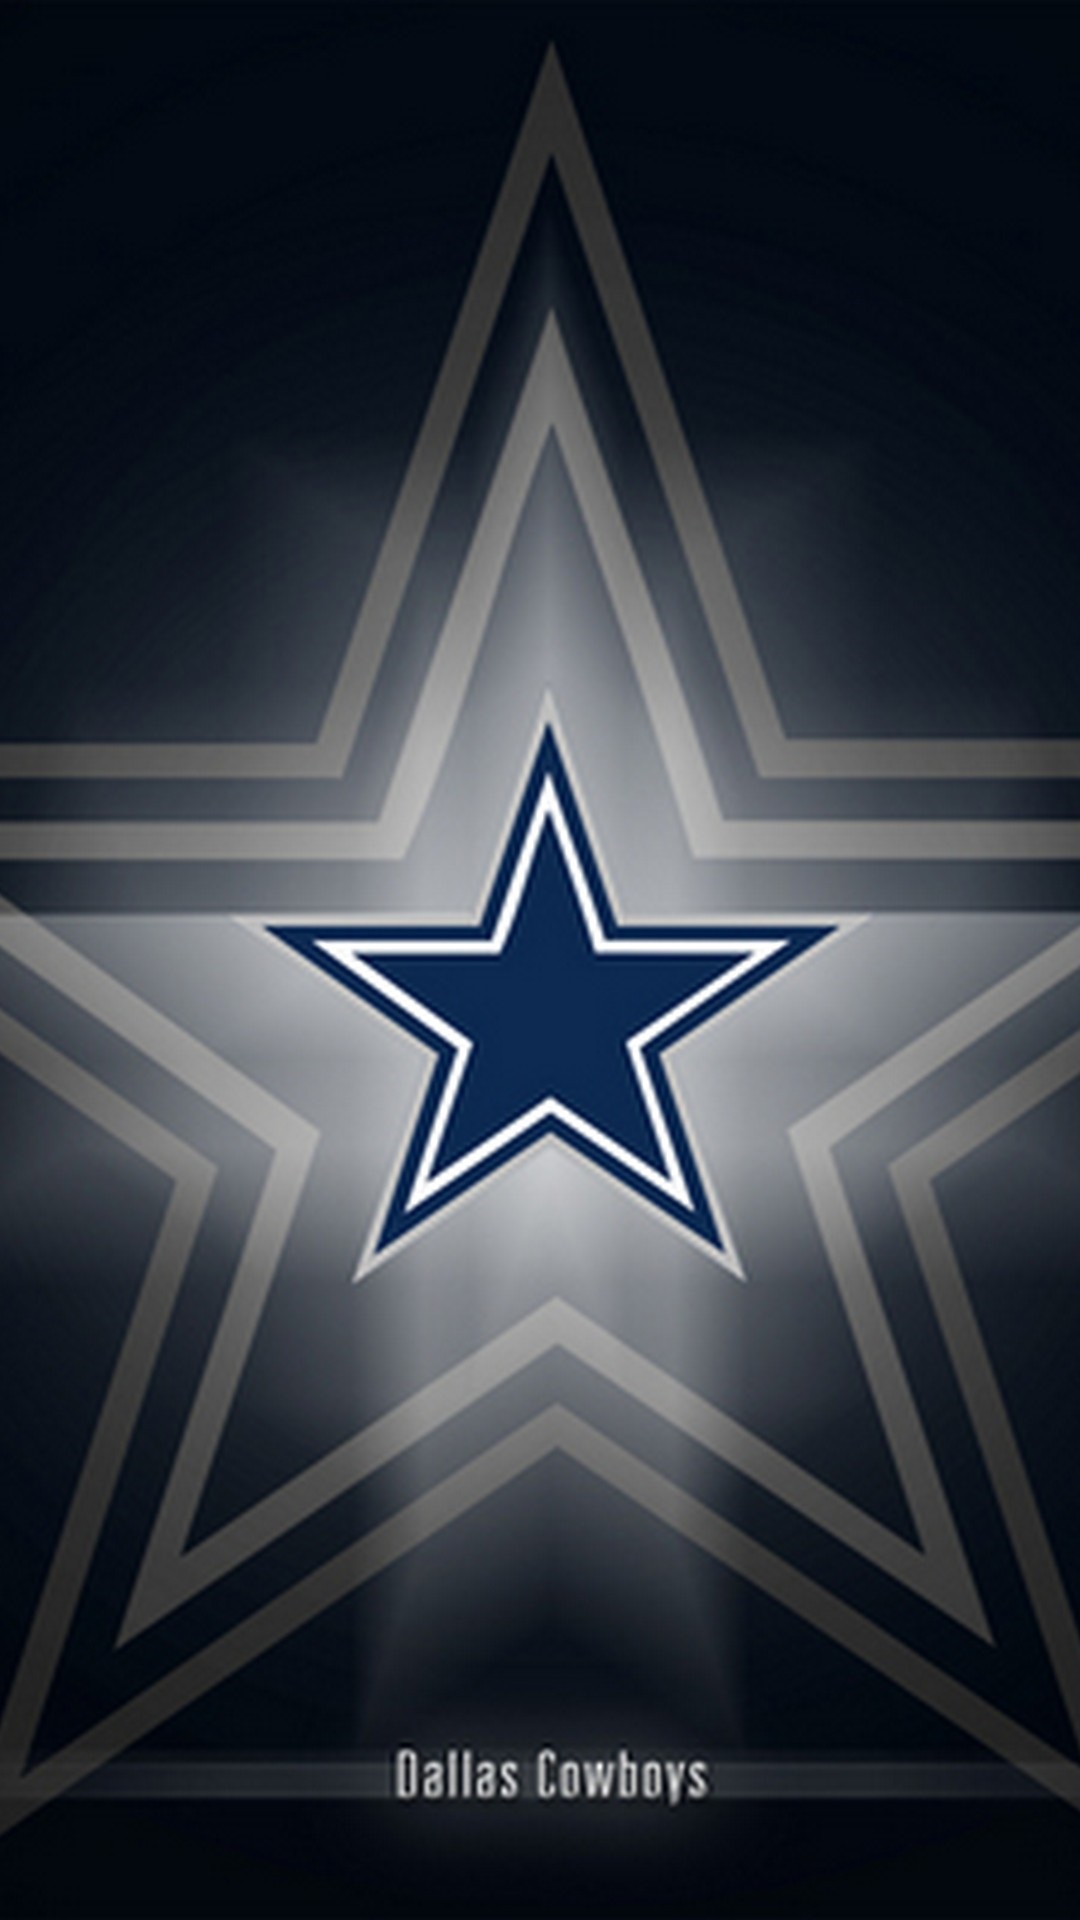 Dallas Cowboys iPhone 7 Plus Wallpaper with high-resolution 1080x1920 pixel. Download and set as wallpaper for Apple iPhone X, XS Max, XR, 8, 7, 6, SE, iPad, Android